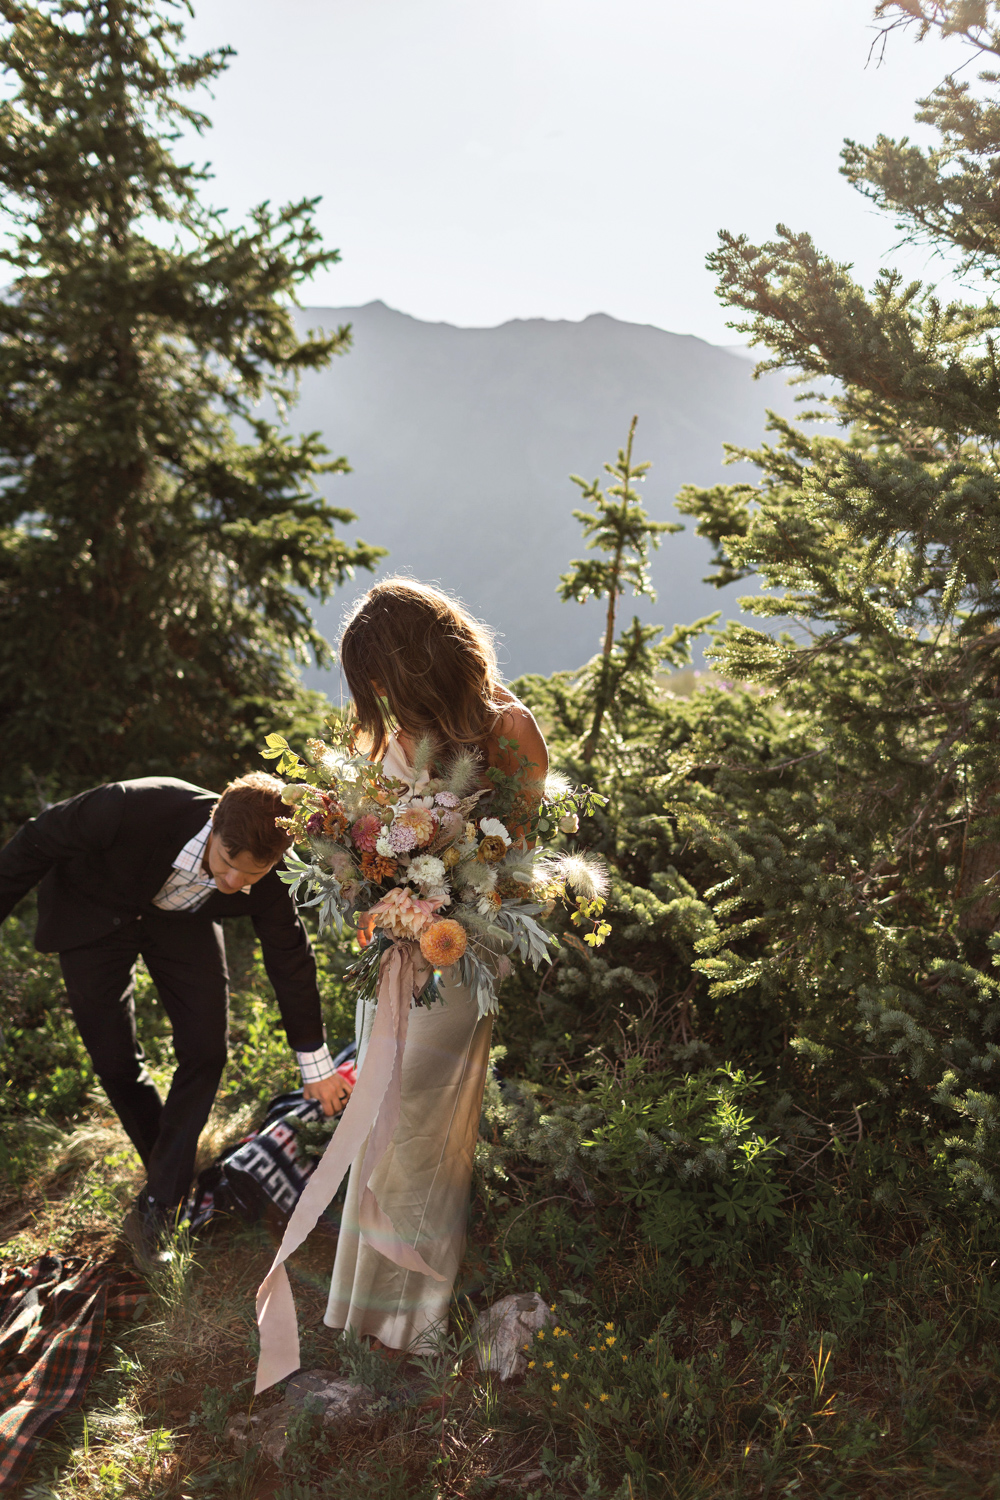 A bride holding a bouquet next to a groom in nature in feed by Little Hollow Flowers